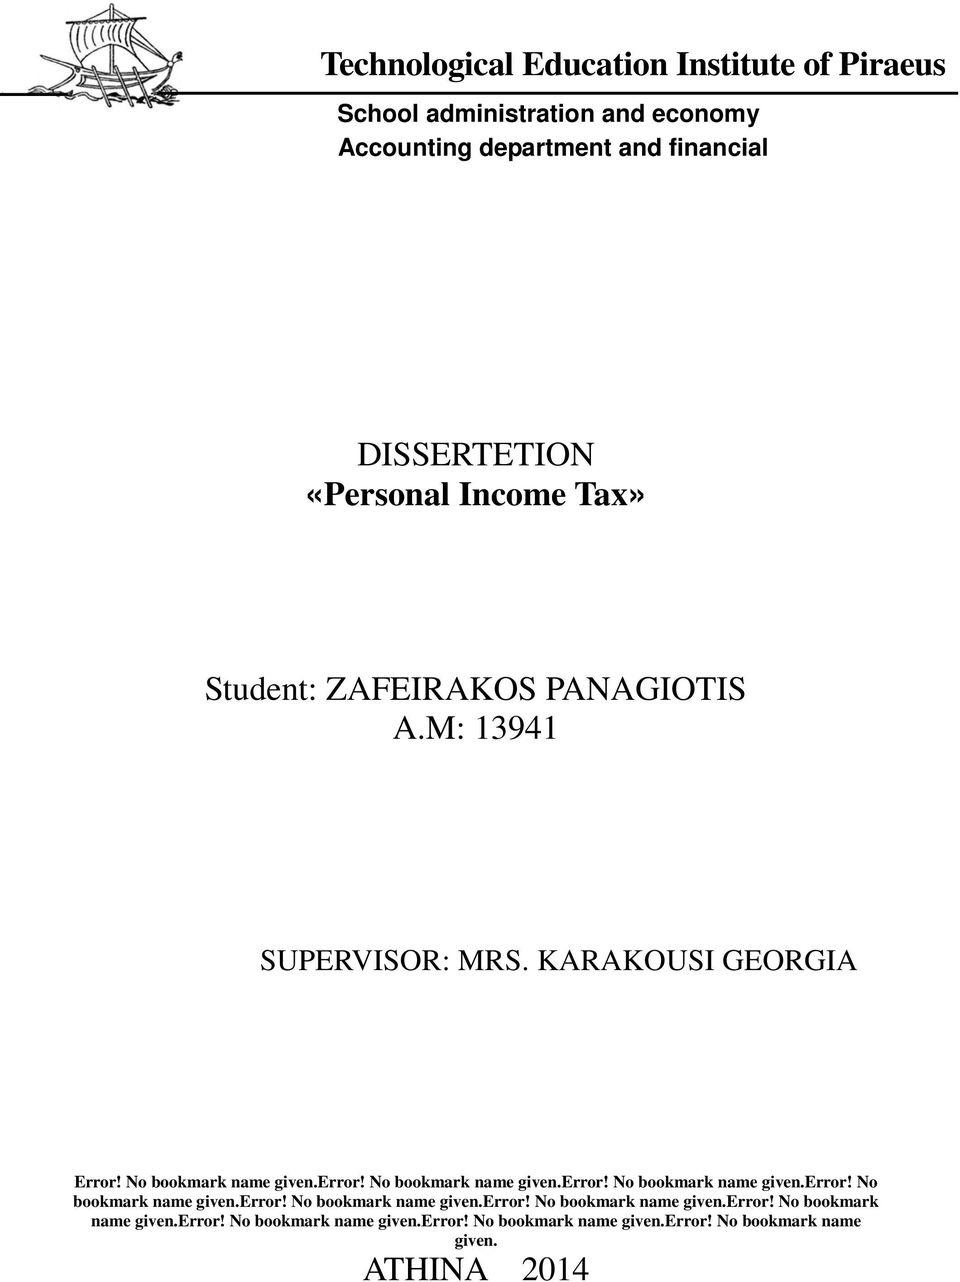 Technological Education Institute of Piraeus School administration and economy Accounting department and financial DISSERTETION «Personal Income Tax» Student: